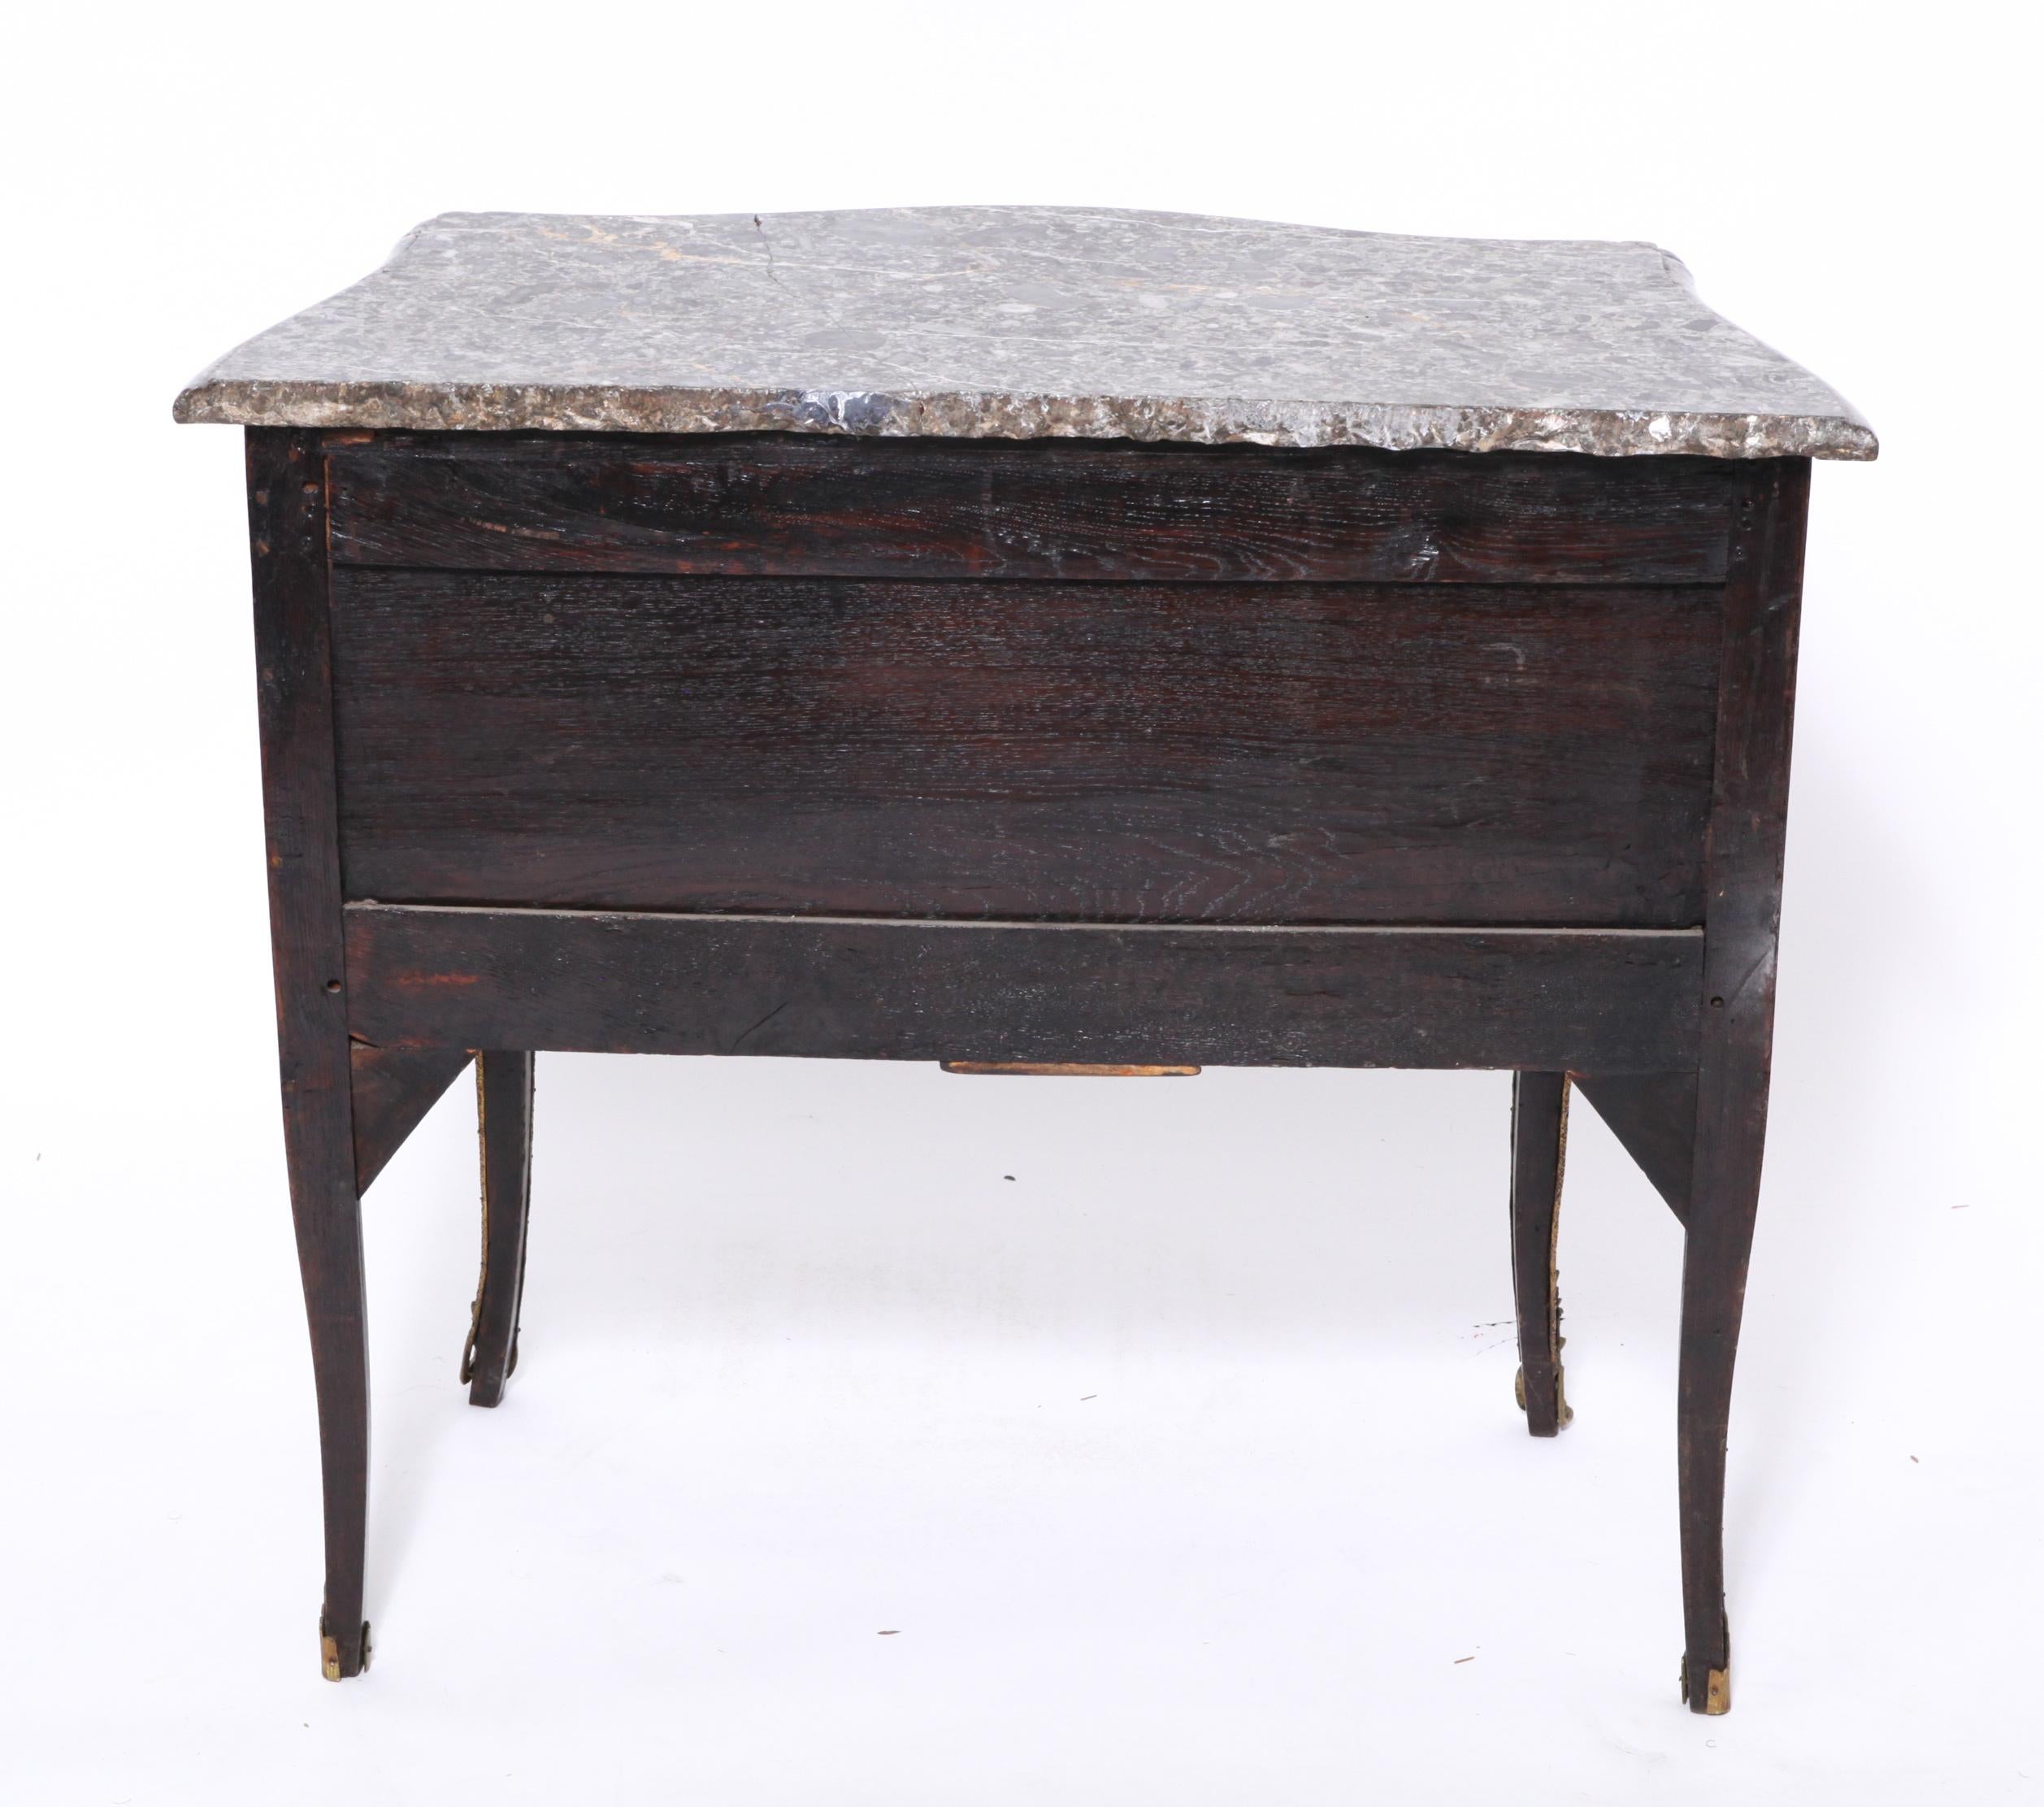 19th Century Louis XV Style Inlaid Commode Bombe with Marble Top